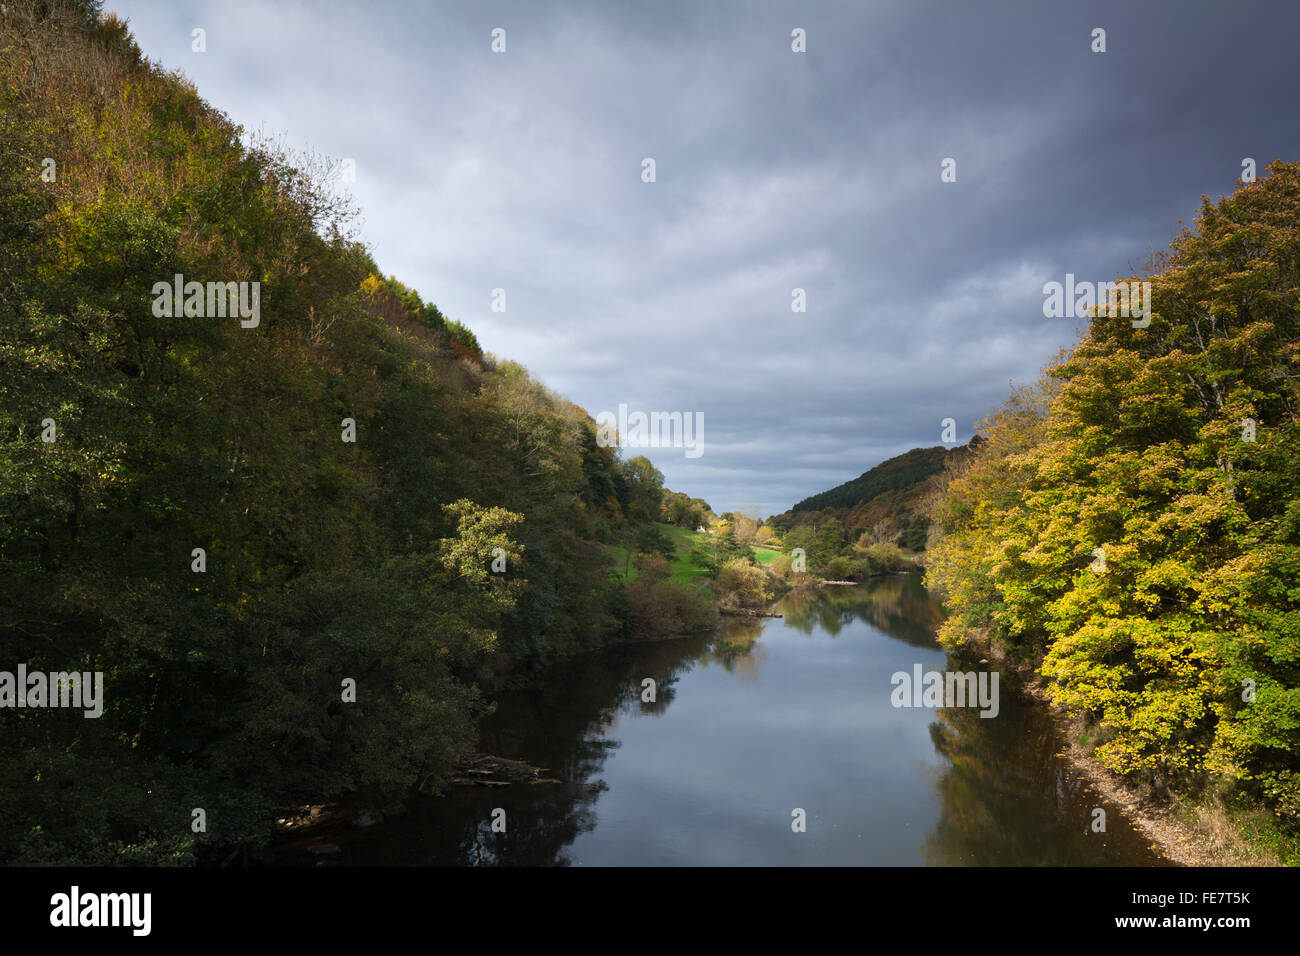 Stormy sky above the River Wye in autumn on the old railway crossing at Redbrook near Monmouth in the lower Wye Valley, Monmouthshire, Wales. Stock Photo